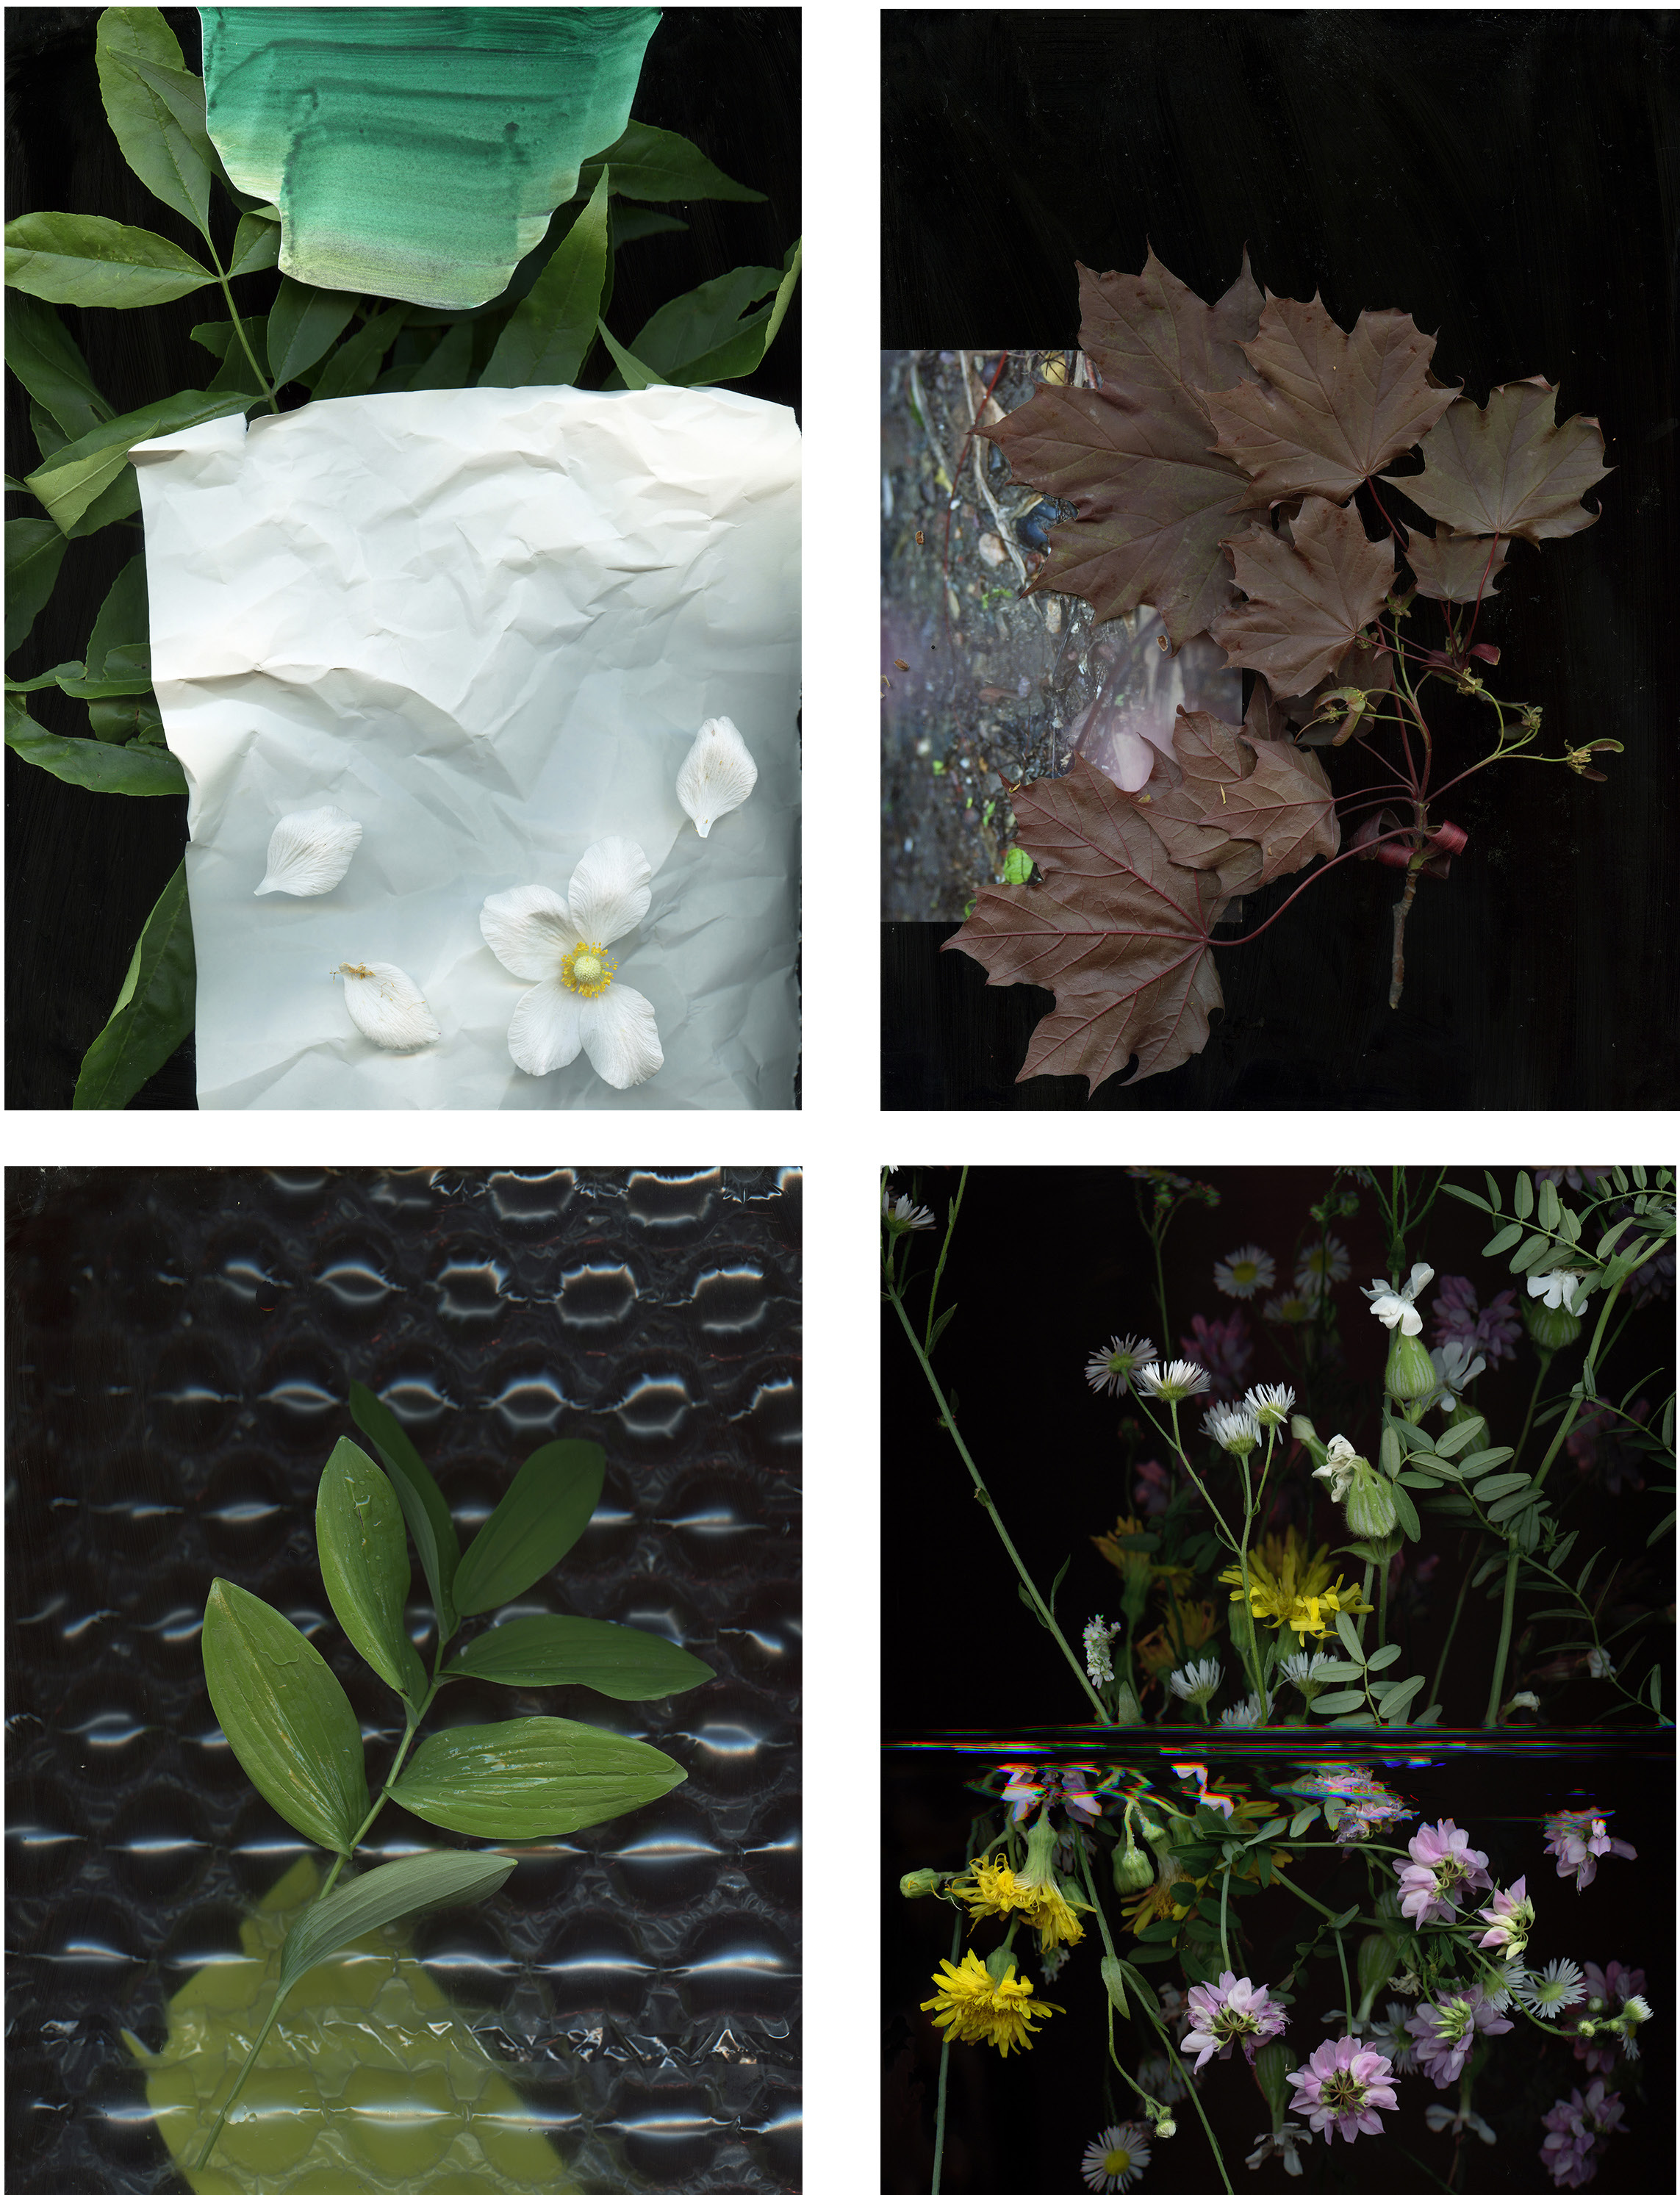 Clockwise from top left, "Prairie Construct #23, #5, #37 & #18," Archival Inkjet Print, each image 36 x 54 inches, by Regan Golden, 2015